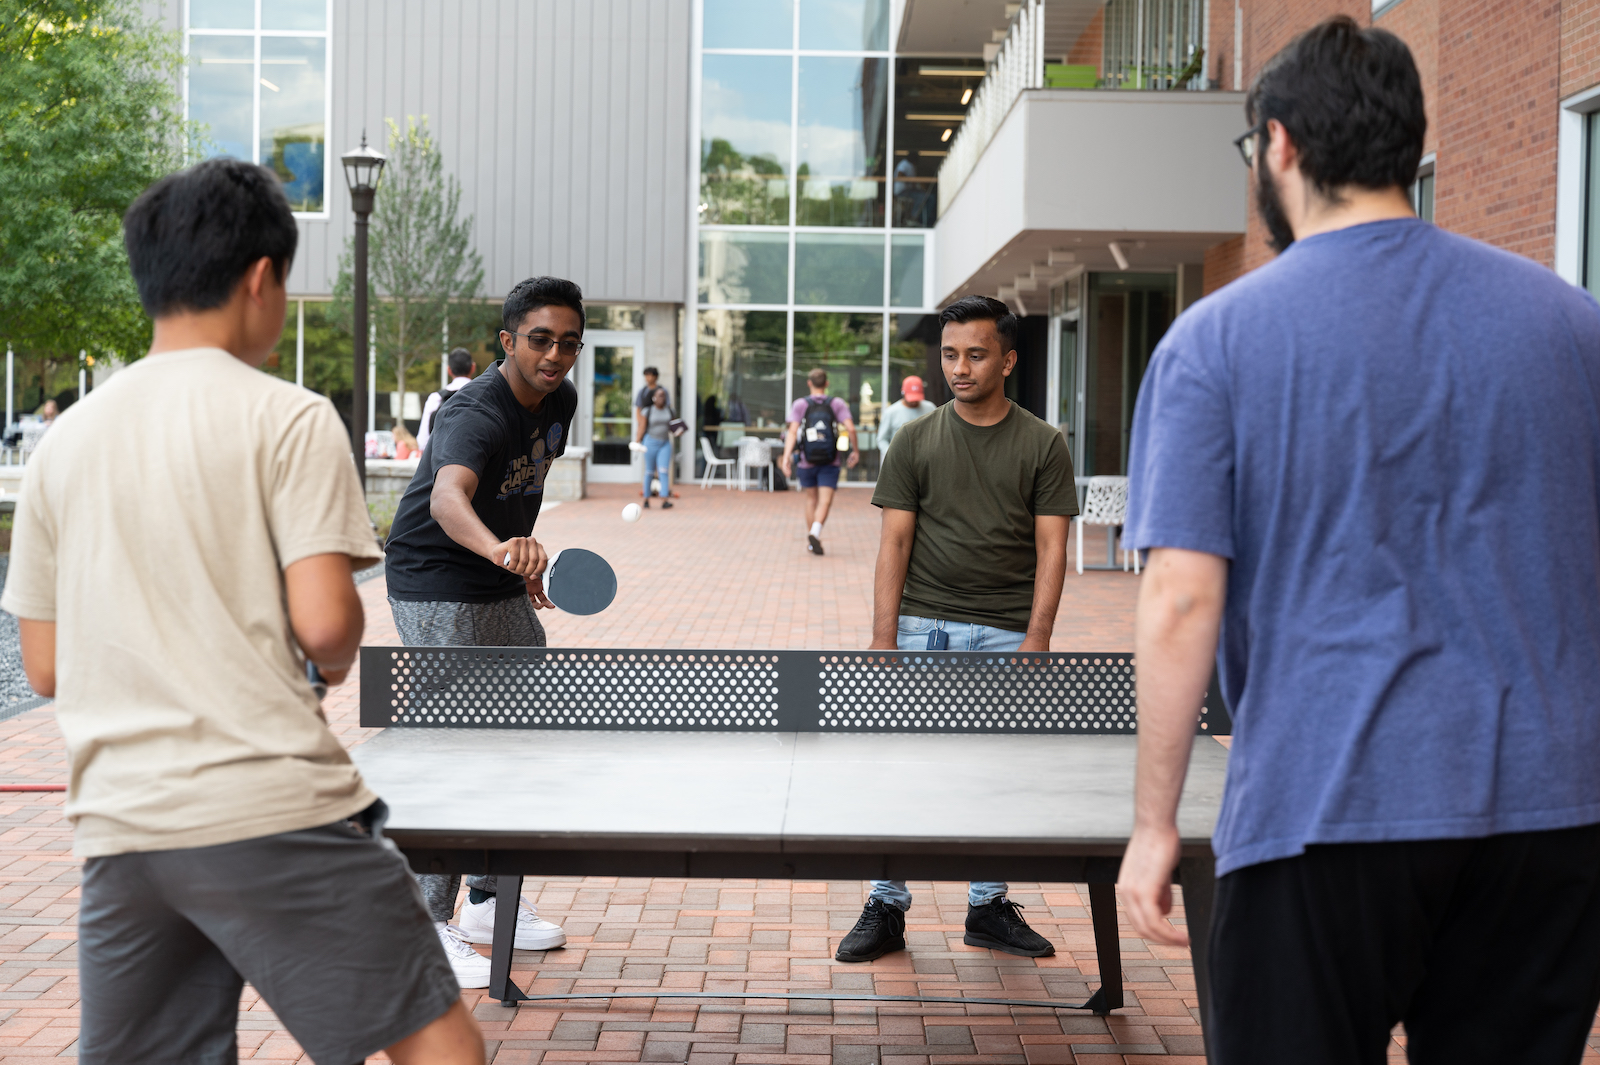 Students playing pin pong outside the student center.